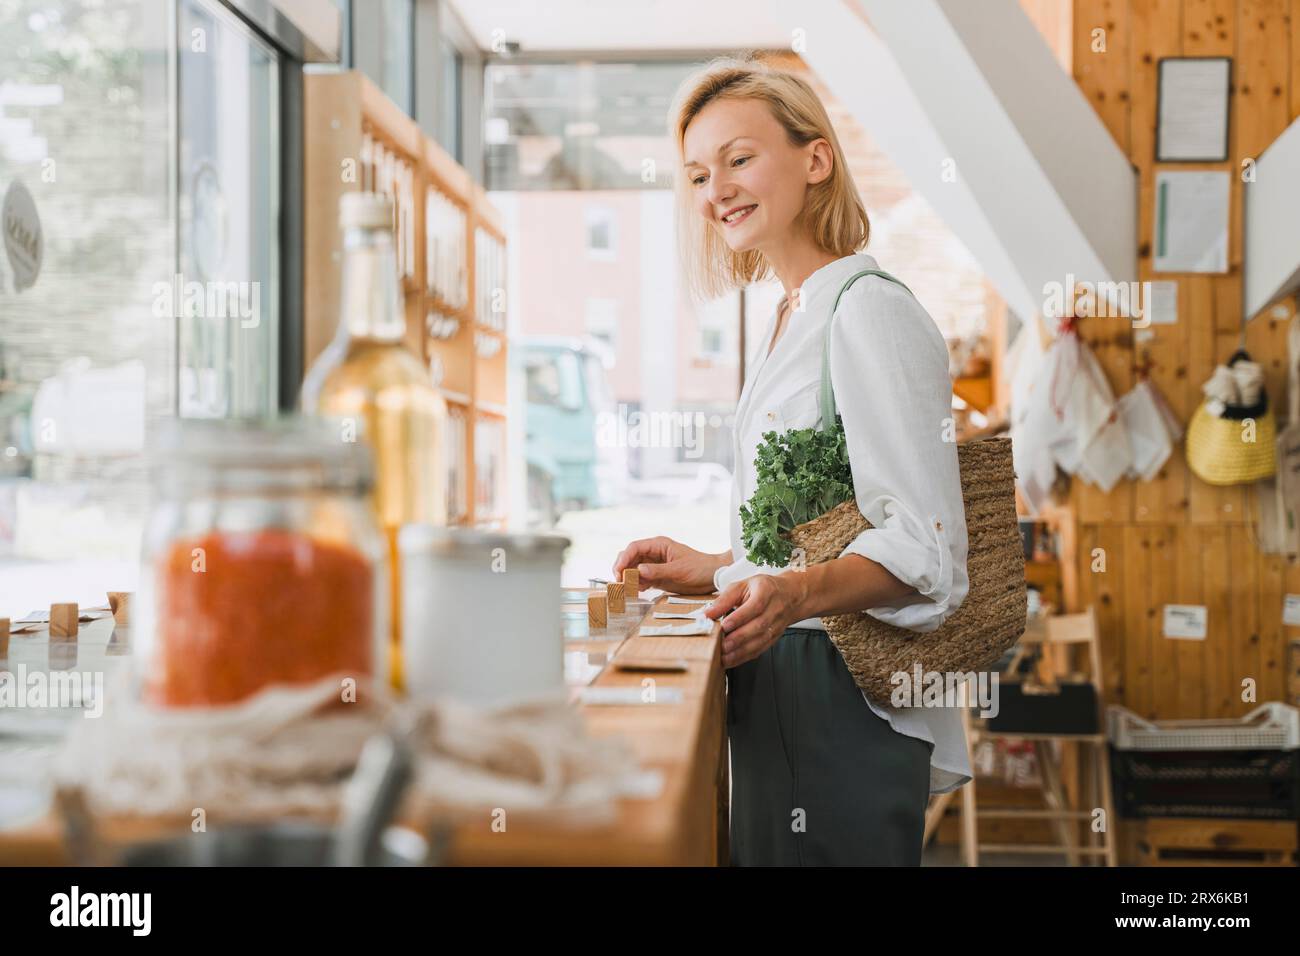 Happy blond woman shopping groceries at store Stock Photo